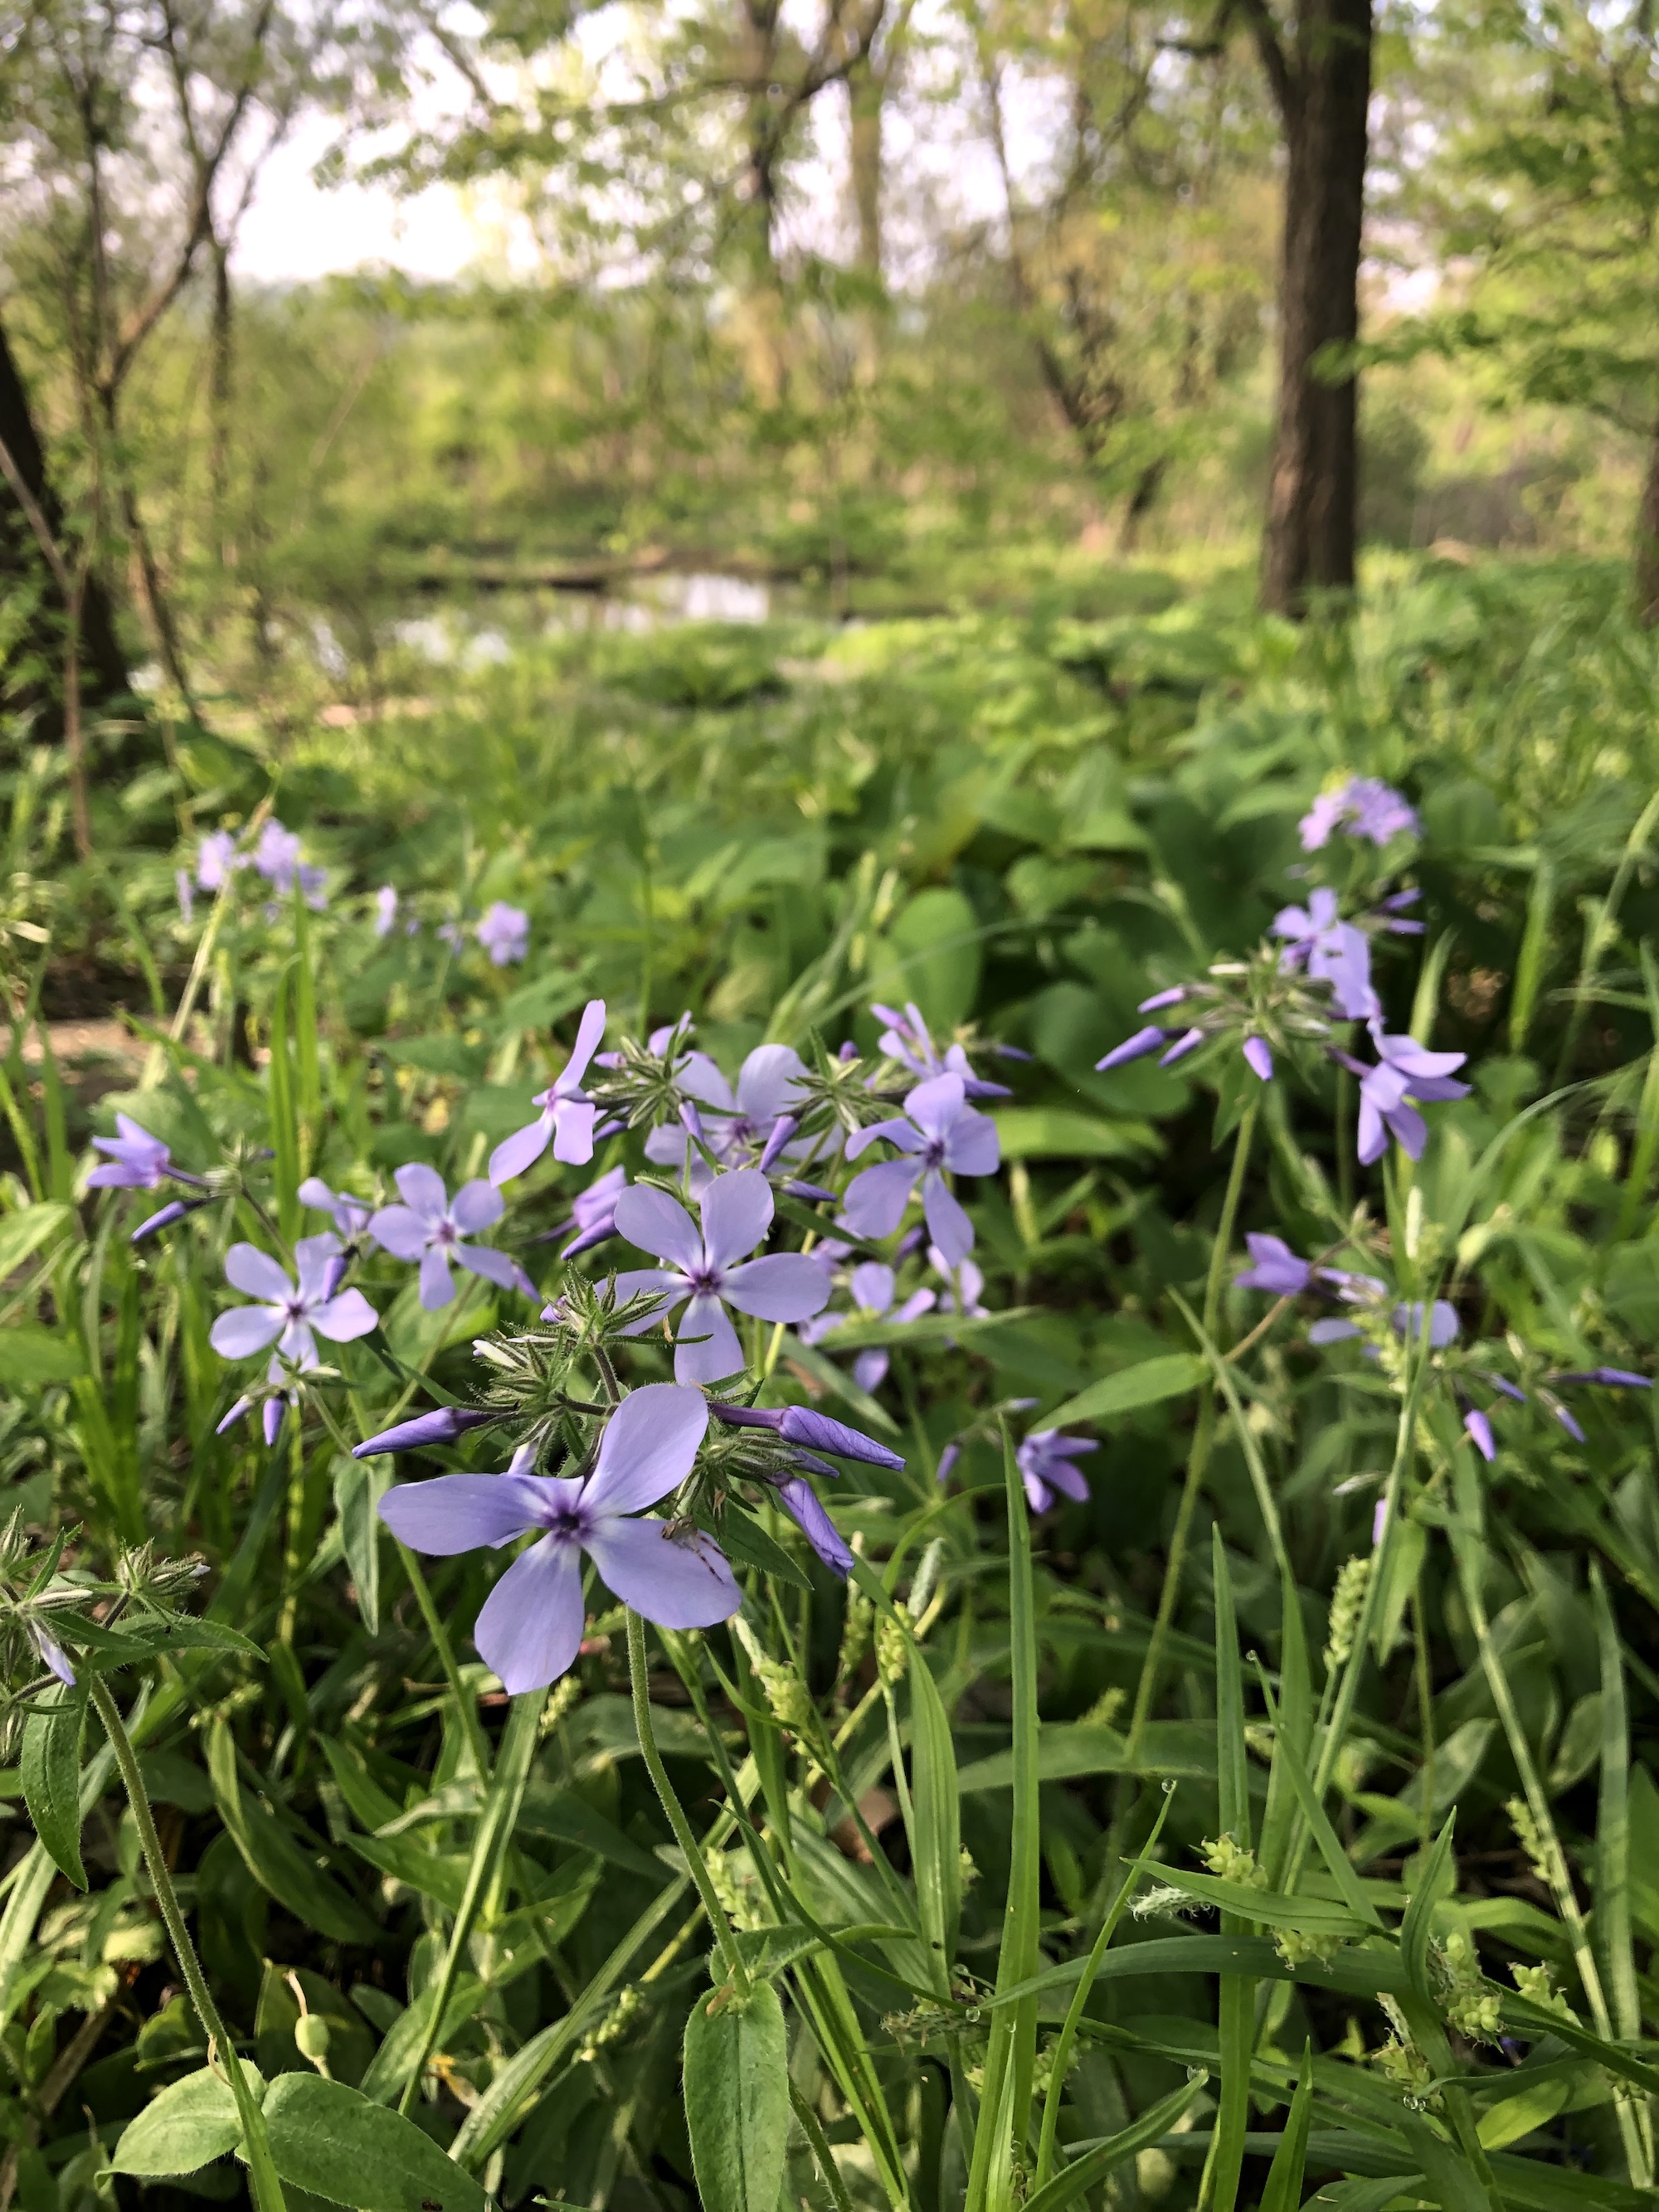 Woodland Phlox by Council Ring in Oak Savanna in Madison, Wisconsin  on May 19, 2022.